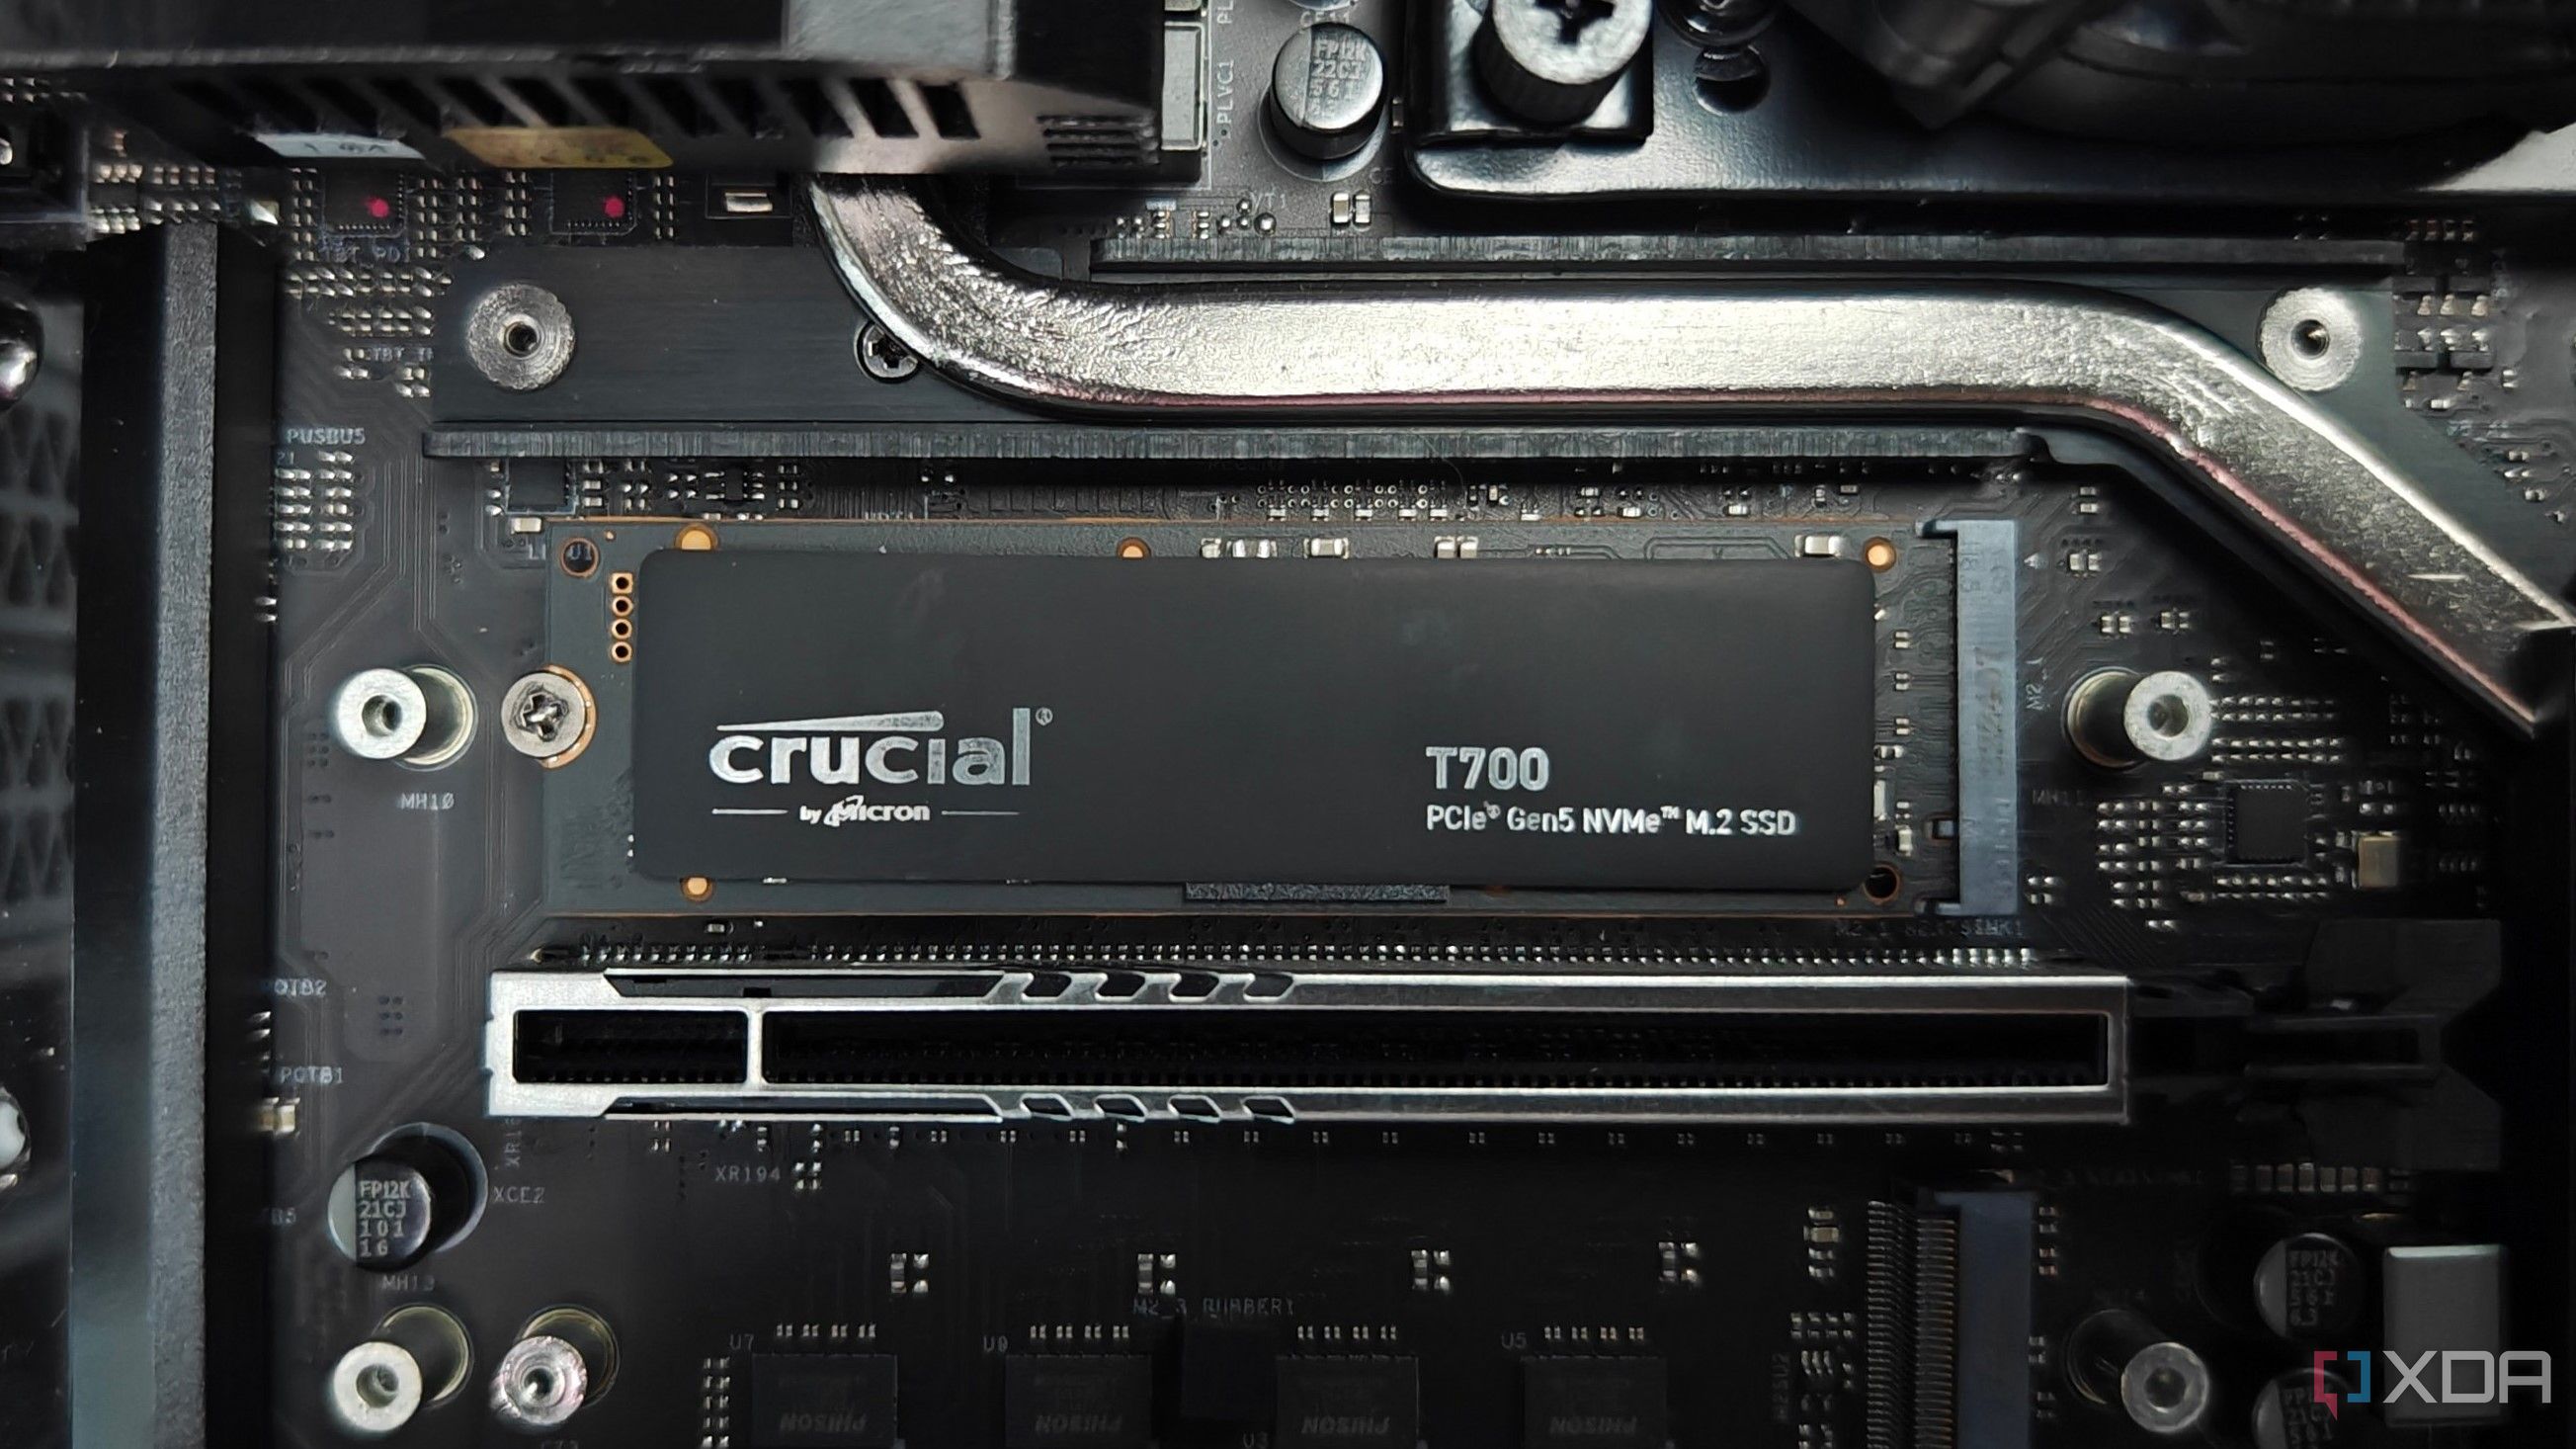 Crucial T700 SSD on a motherboard